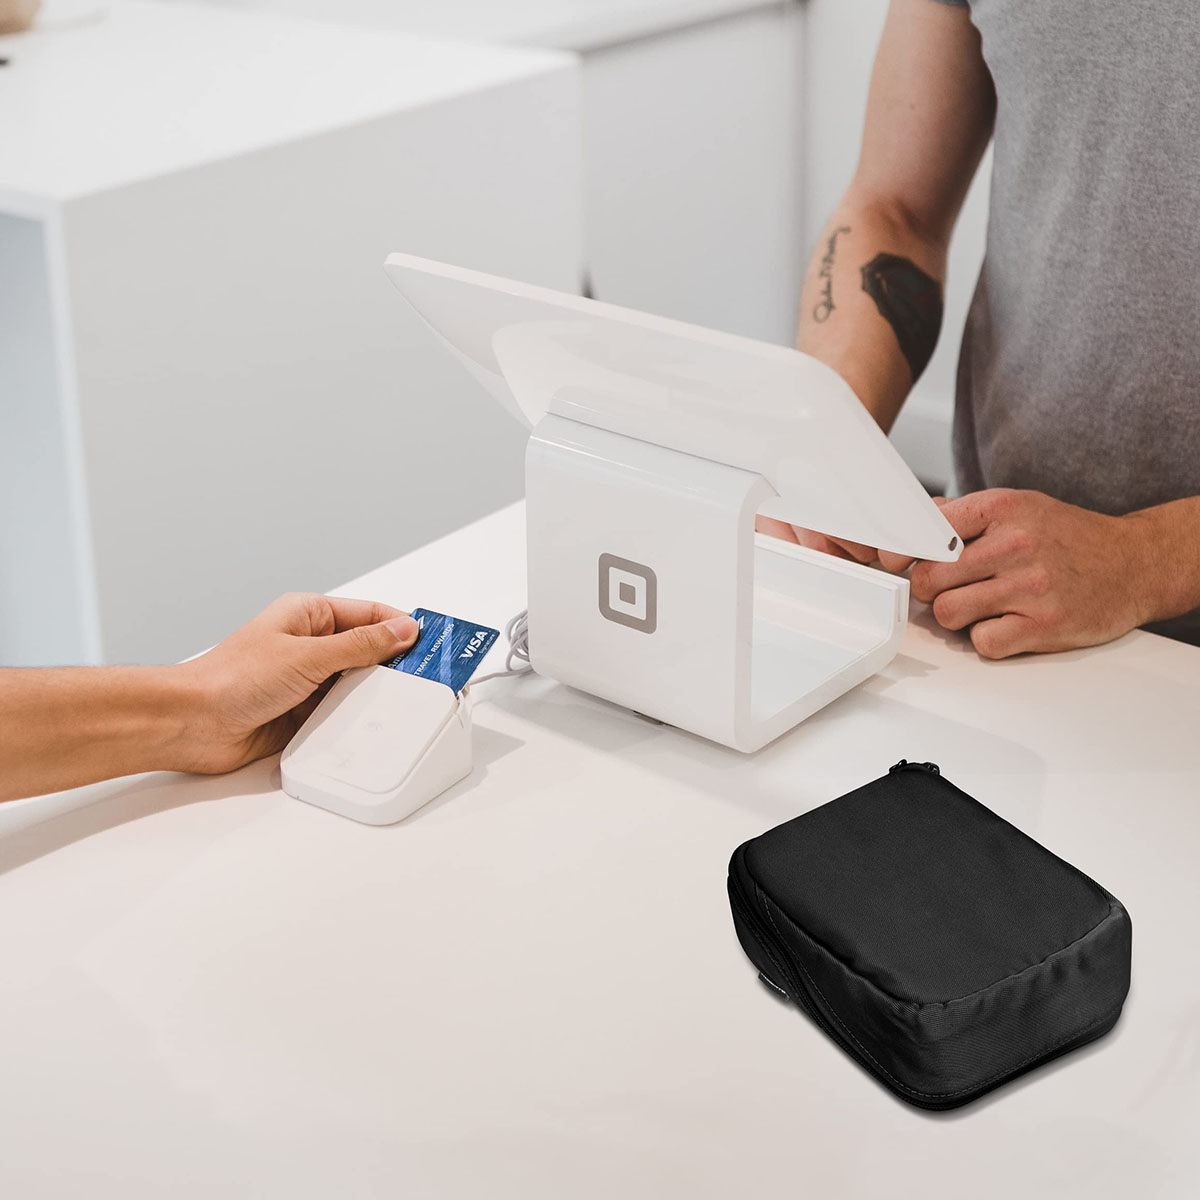 How To Use The Square EMV Chip Reader